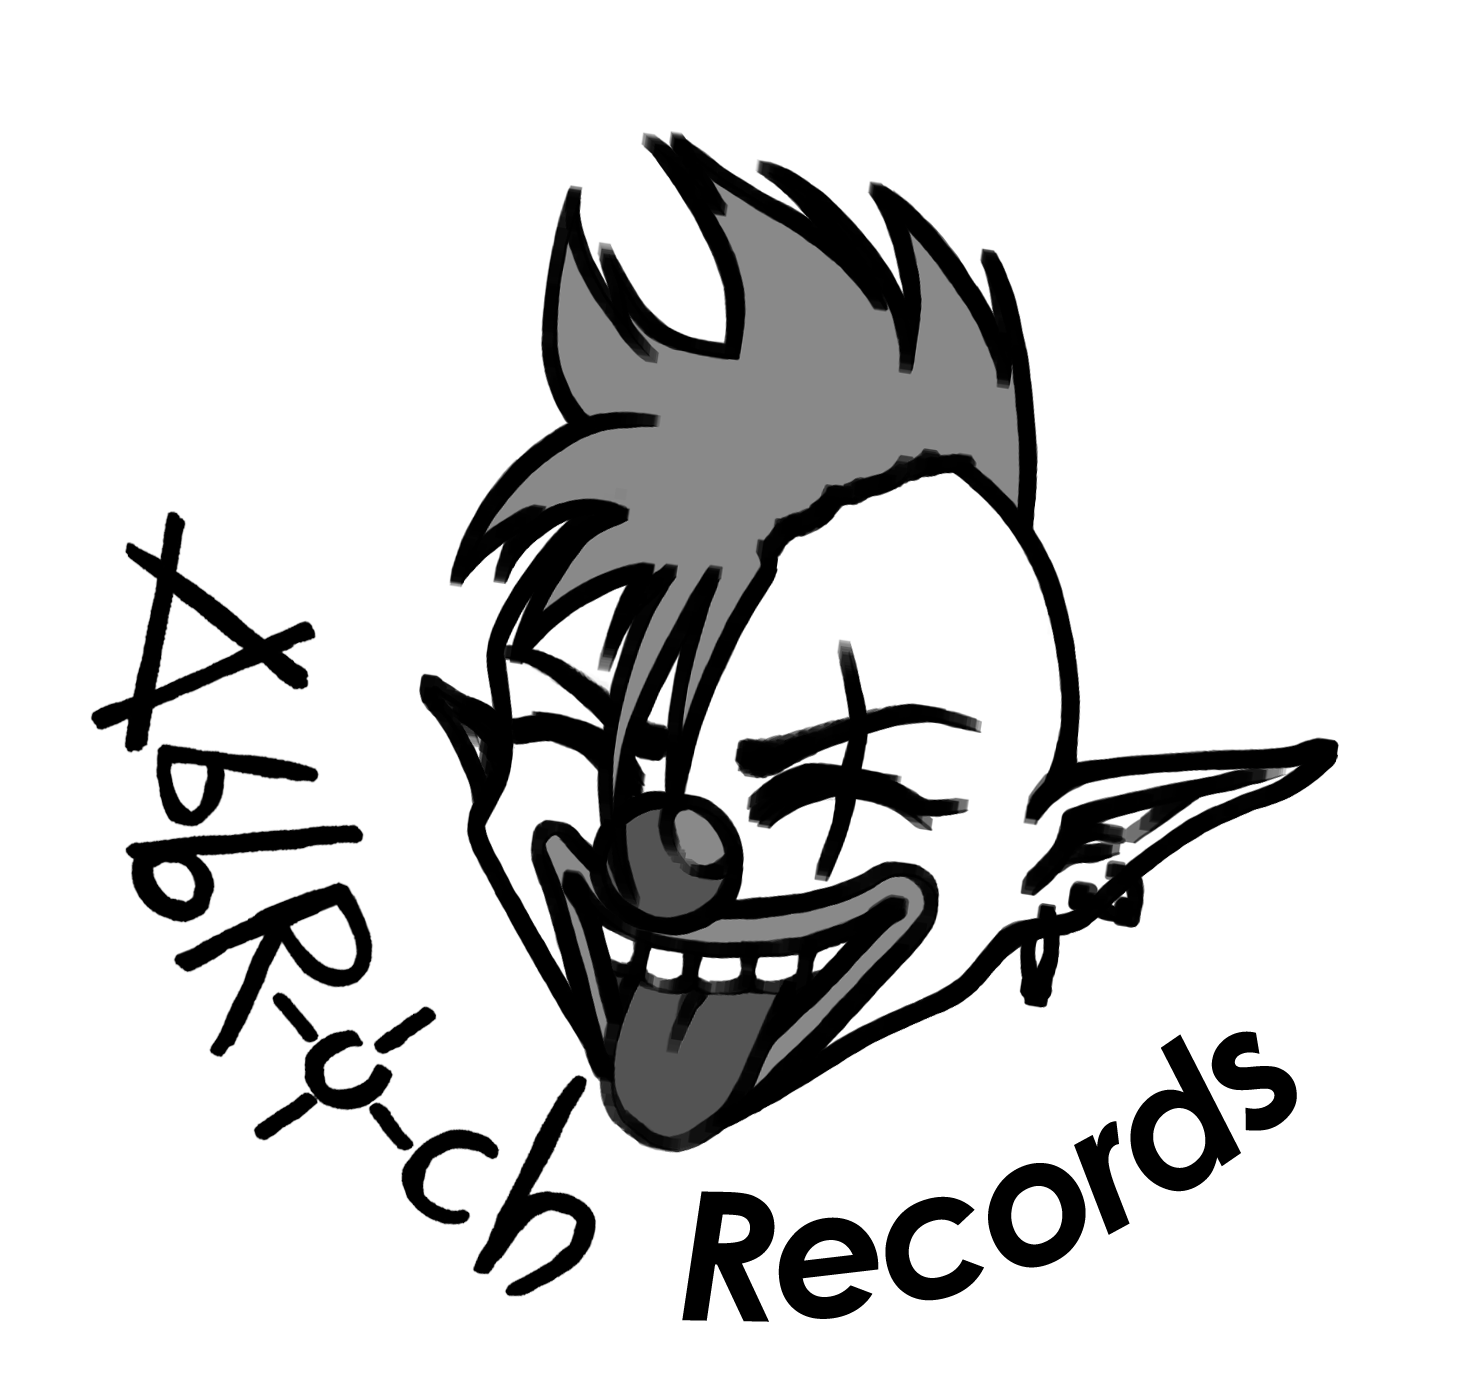 Abbruch Records releases